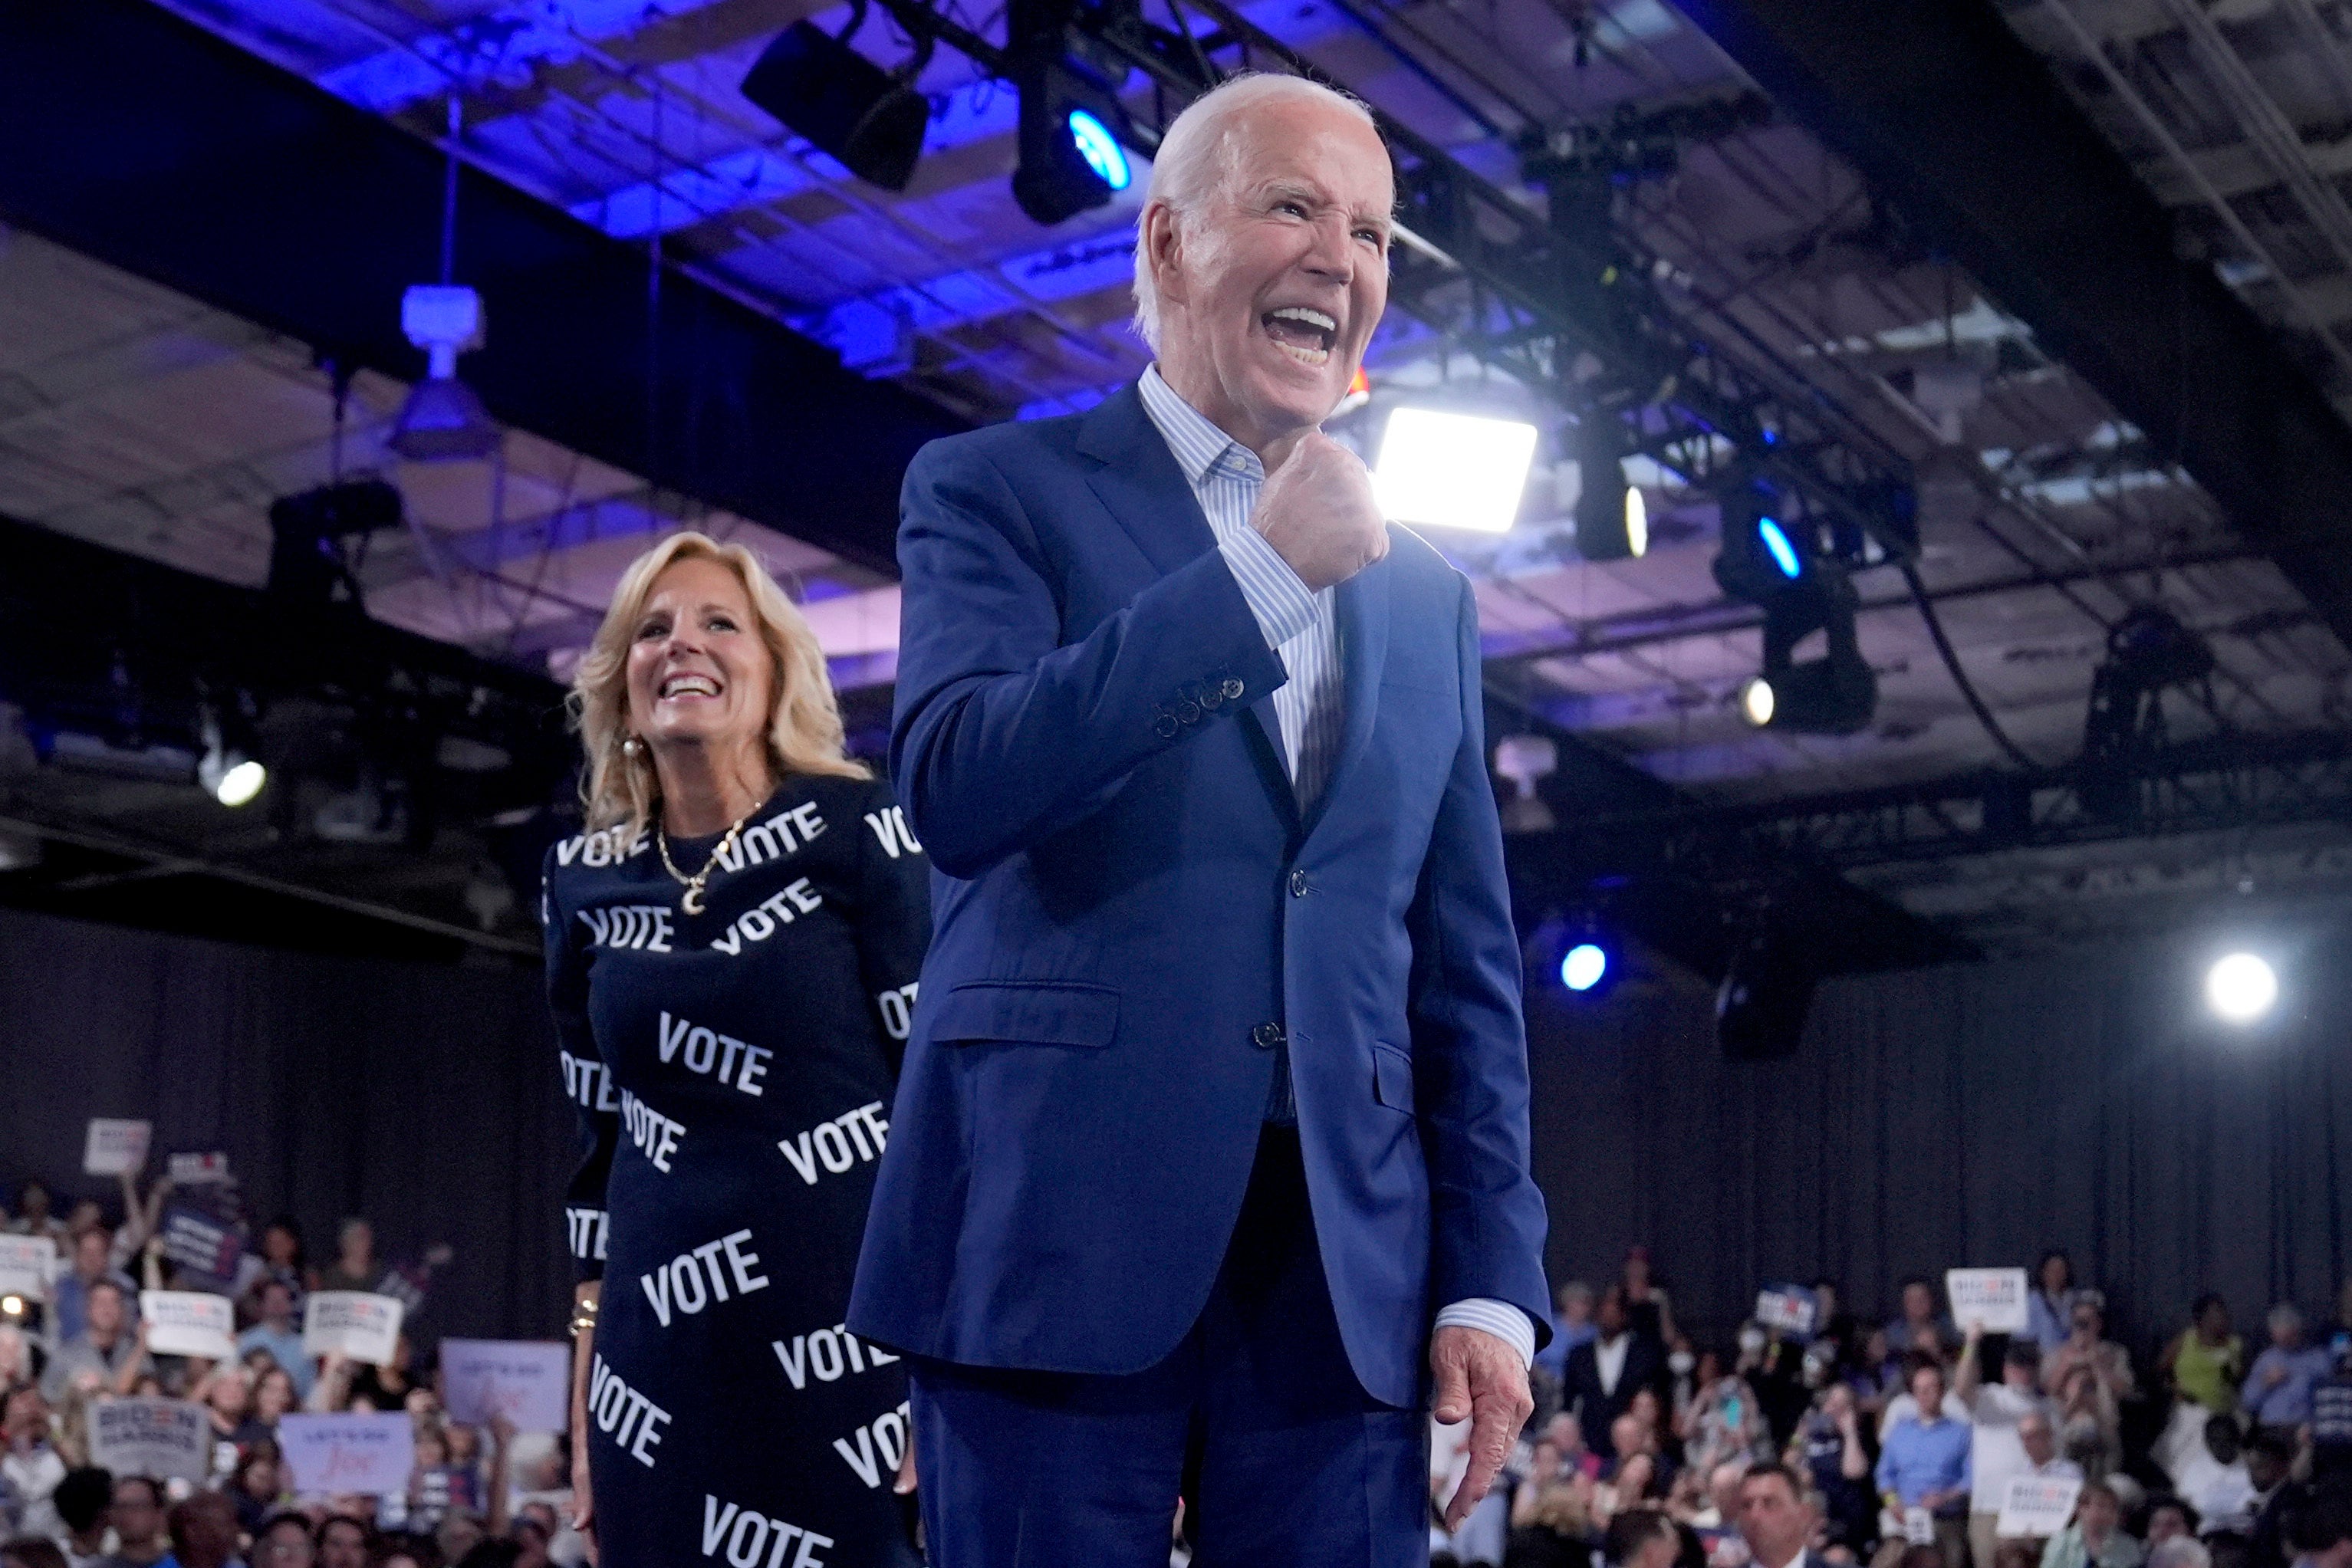 Biden came out swinging on Friday after a bad debate performance the night before